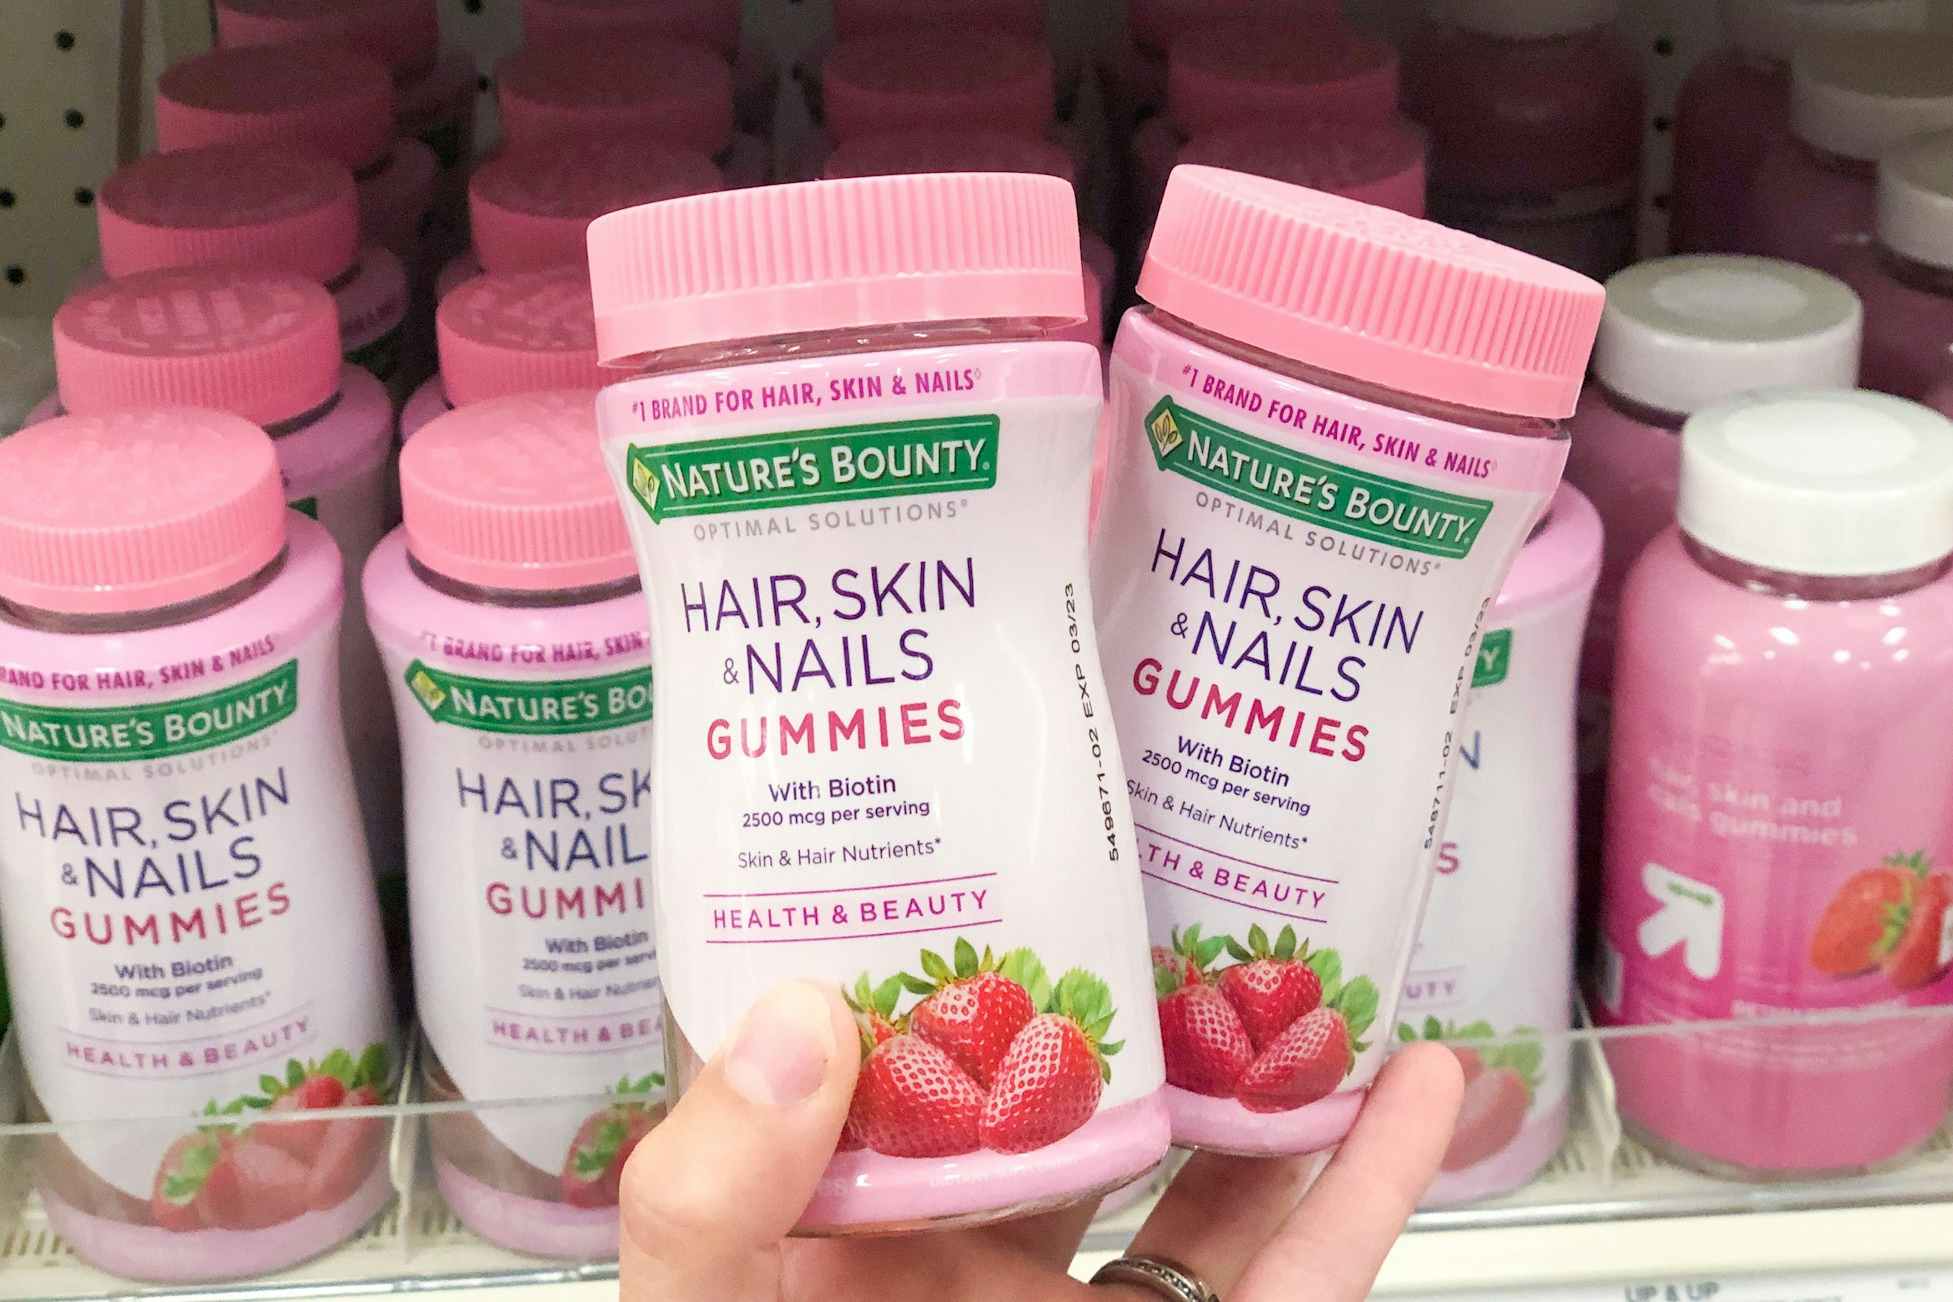 Nature's Bounty Hair, Skin & Nails Vitamins, as Low as $1.78 on Amazon